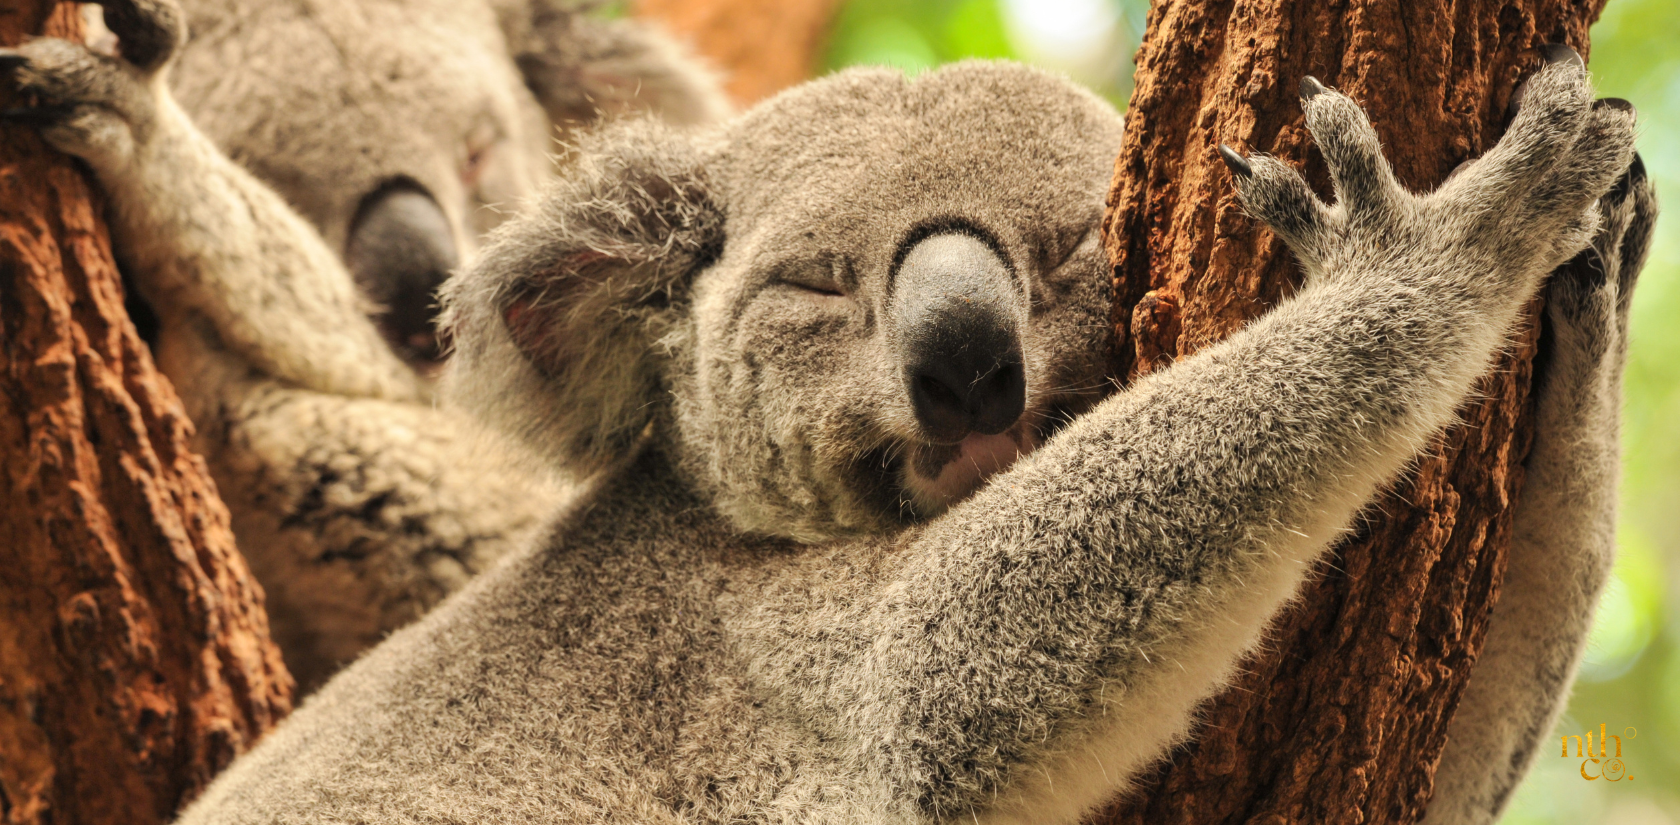 A koala sleeps peacefully in a tree, surrounded by lush greenery. The koala is curled up in a ball, its eyes closed and its fur fluffed up. The tree provides the koala with a comfortable and secure place to sleep. The soft leaves and the gentle breeze create a relaxing and calming environment. The koala is clearly content and at peace 